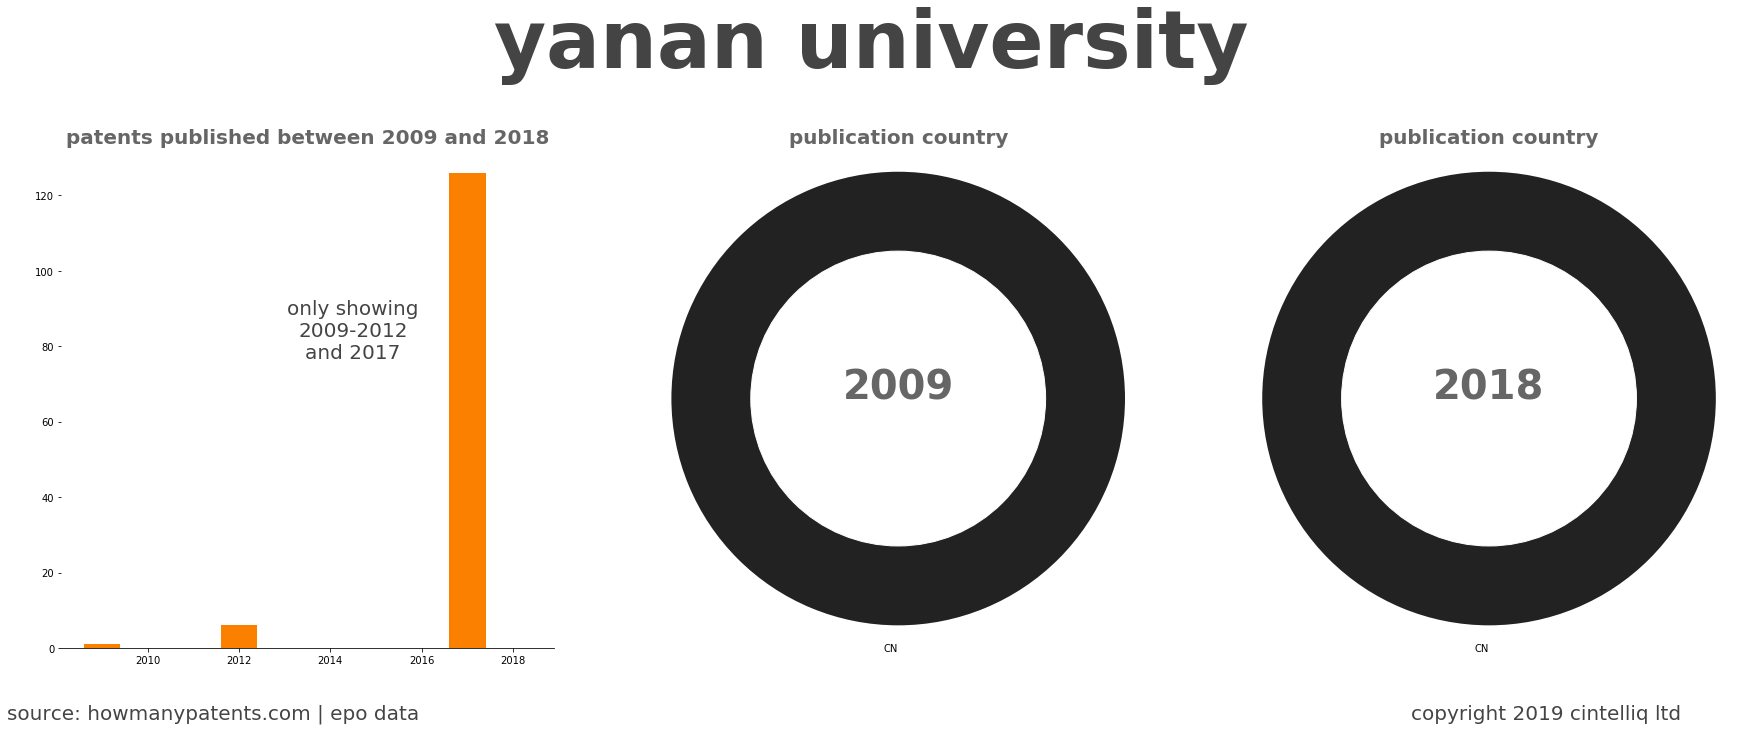 summary of patents for Yanan University